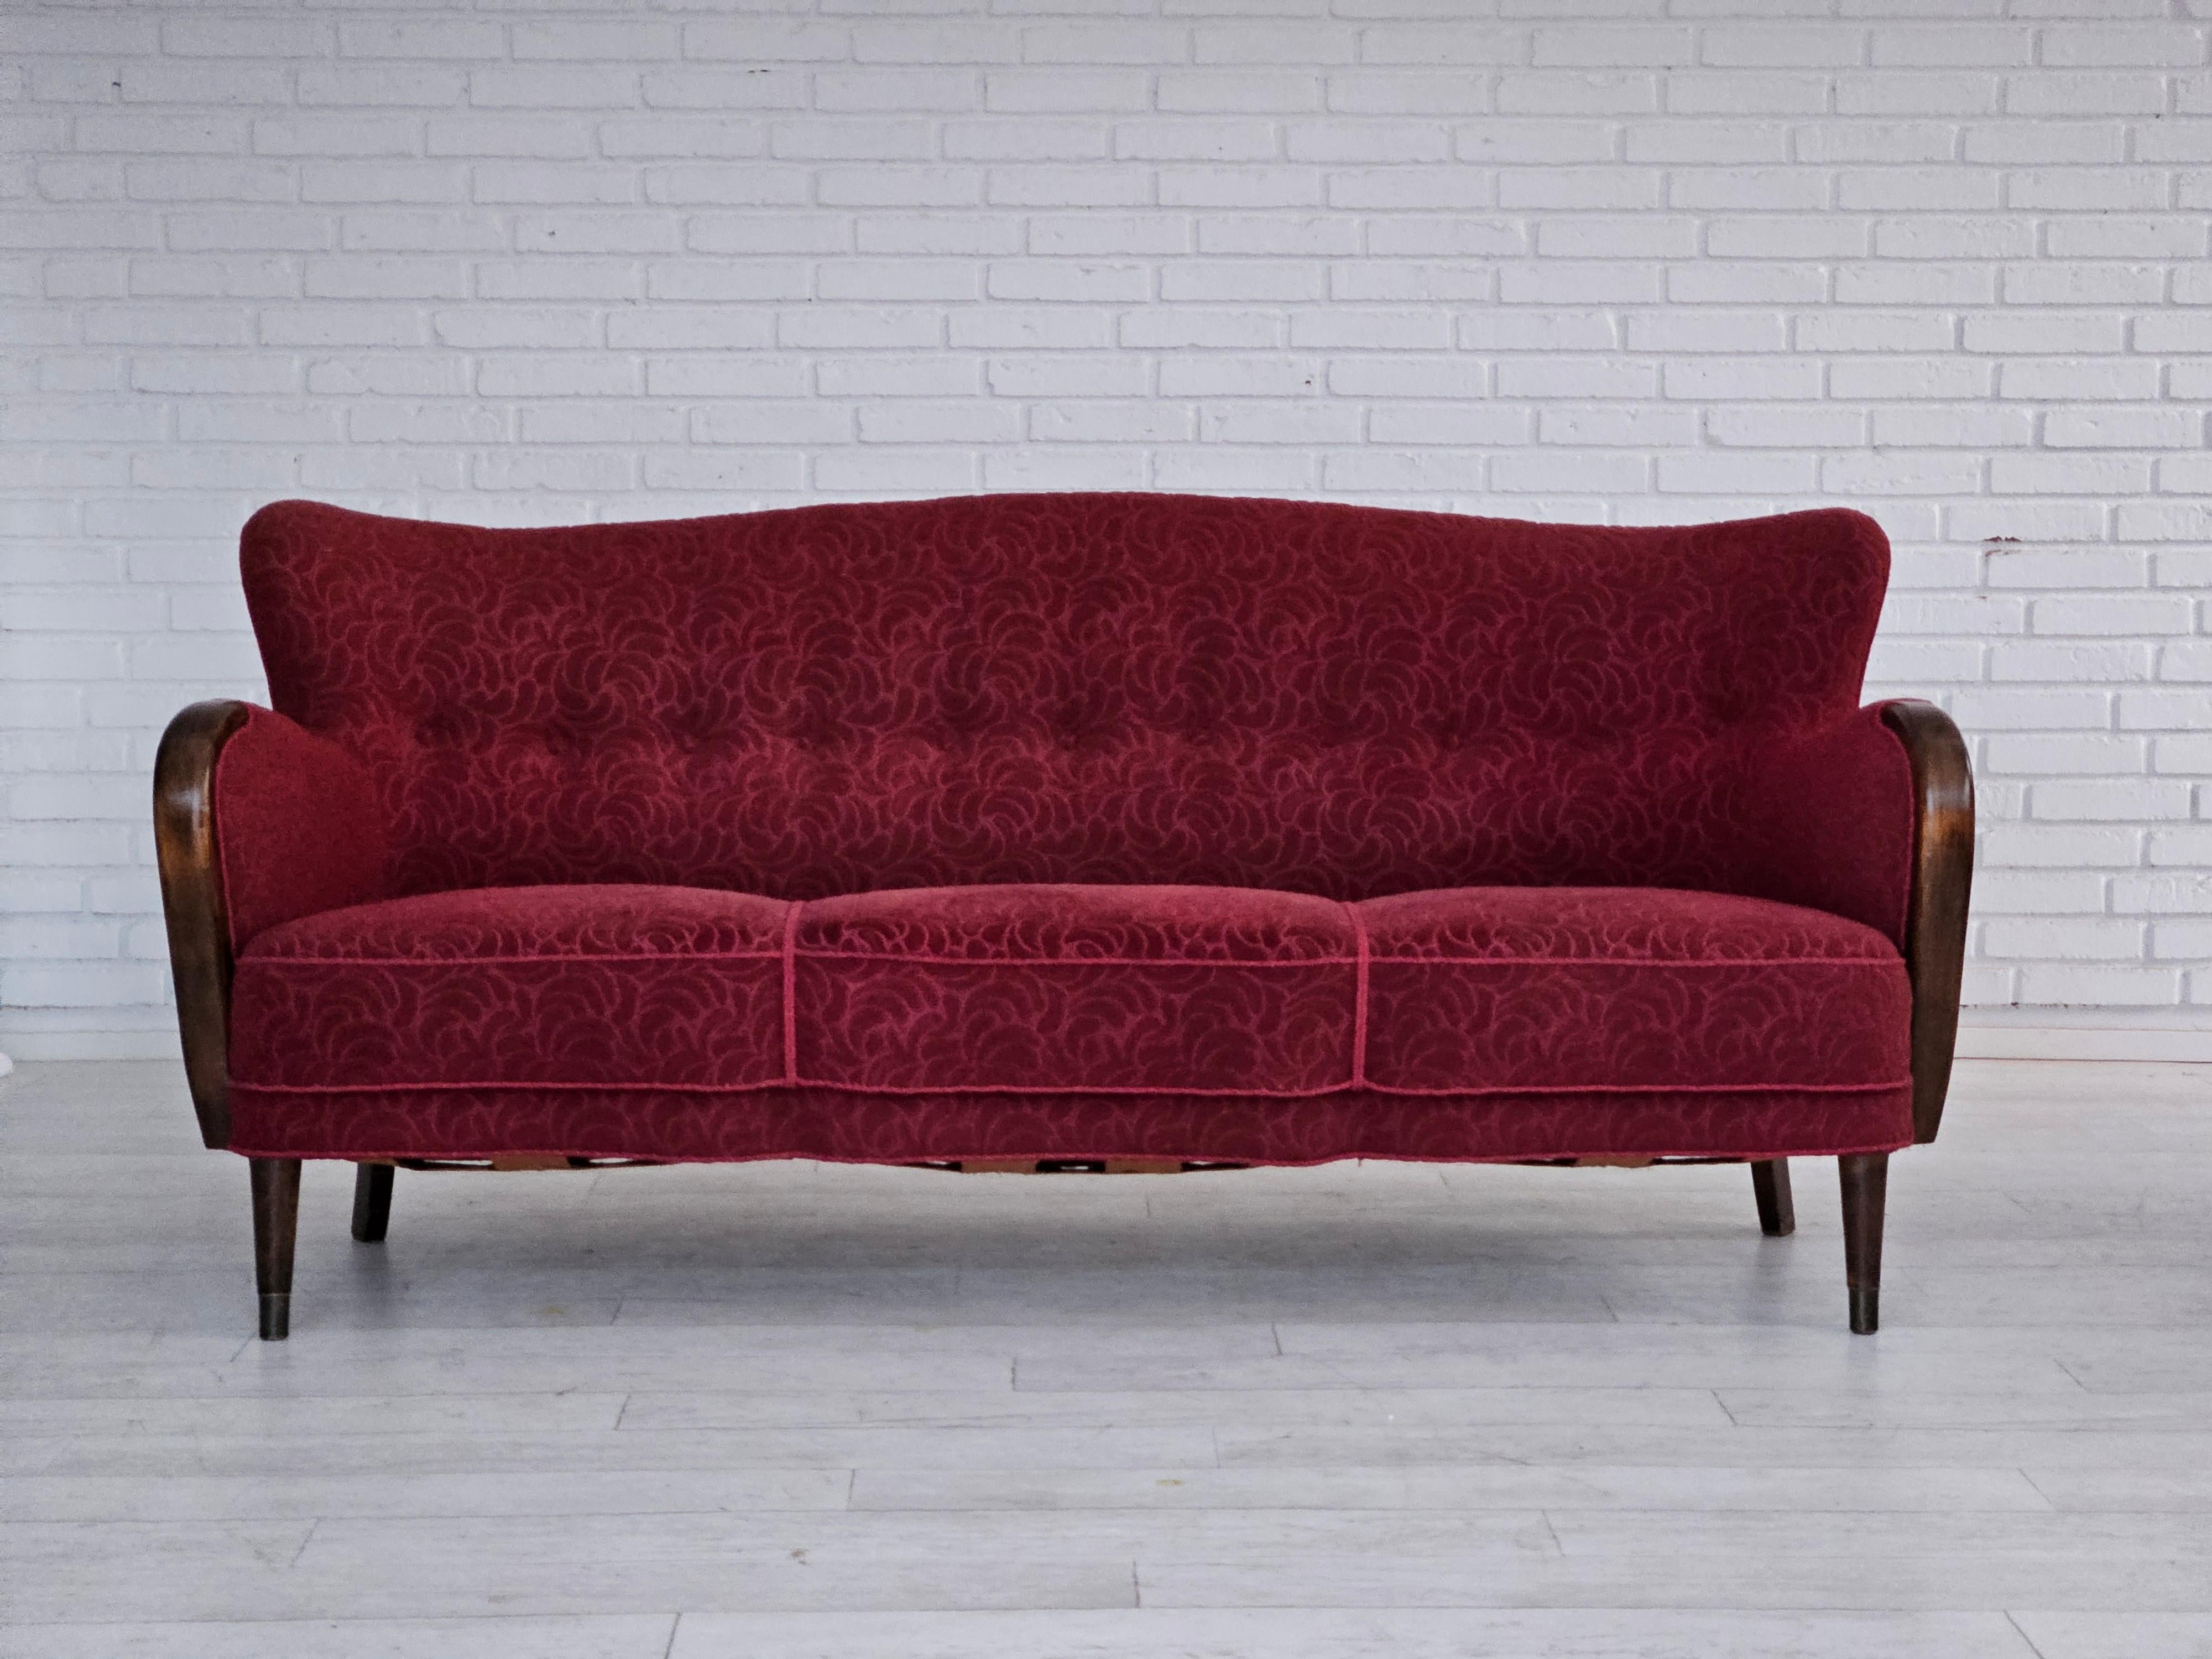 1960s, Danish 3 seater sofa in original very good condition: no smells and no stains. Original red cotton/wool furniture fabric, beech wood legs with brass plugs, brass springs in the seat. Manufactured by Danish furniture manufacturer in about